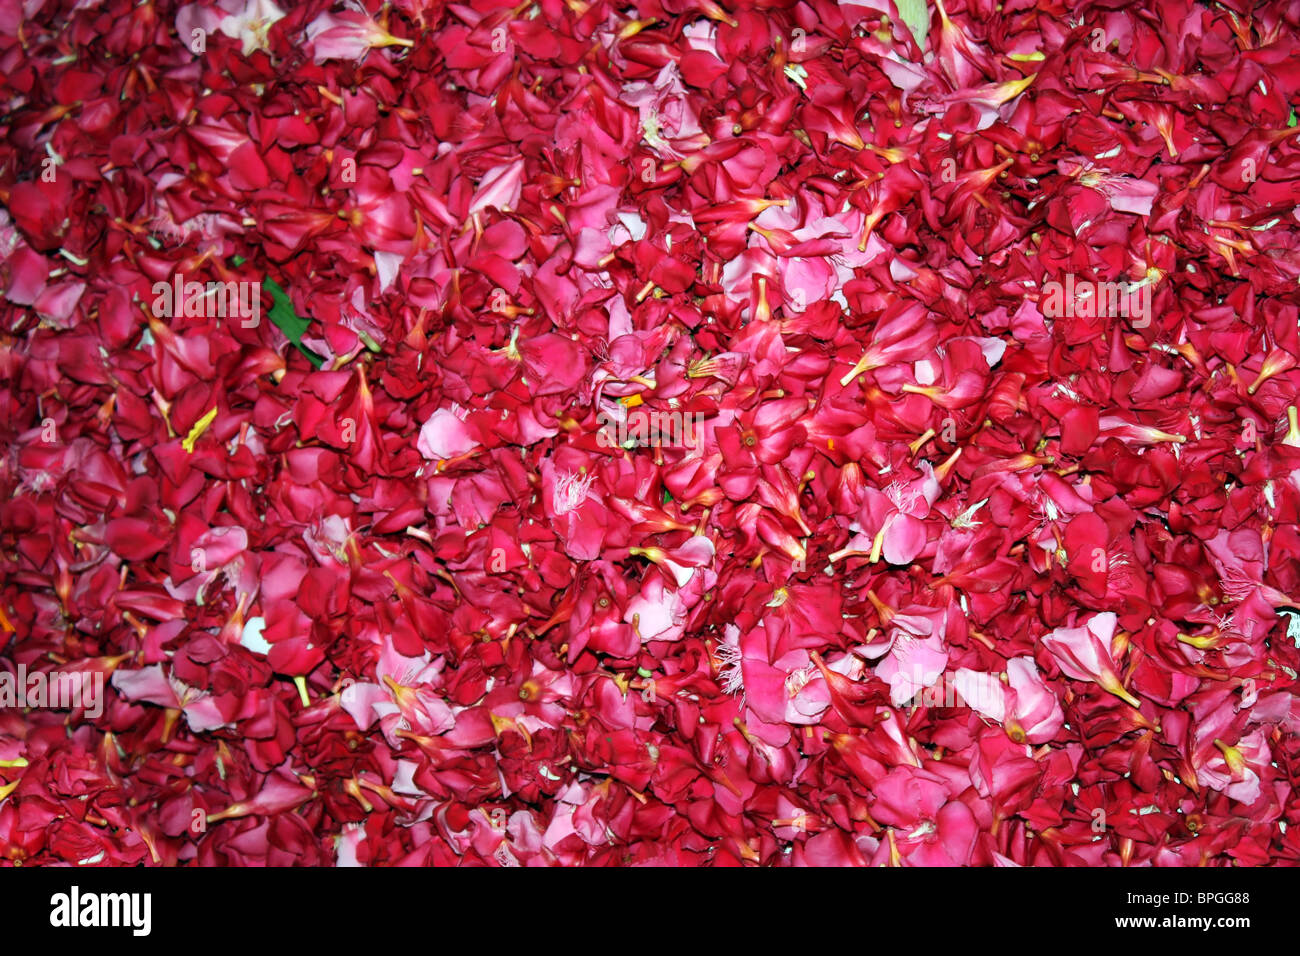 group of pinched flower petals of red rose flower ornamental Stock Photo